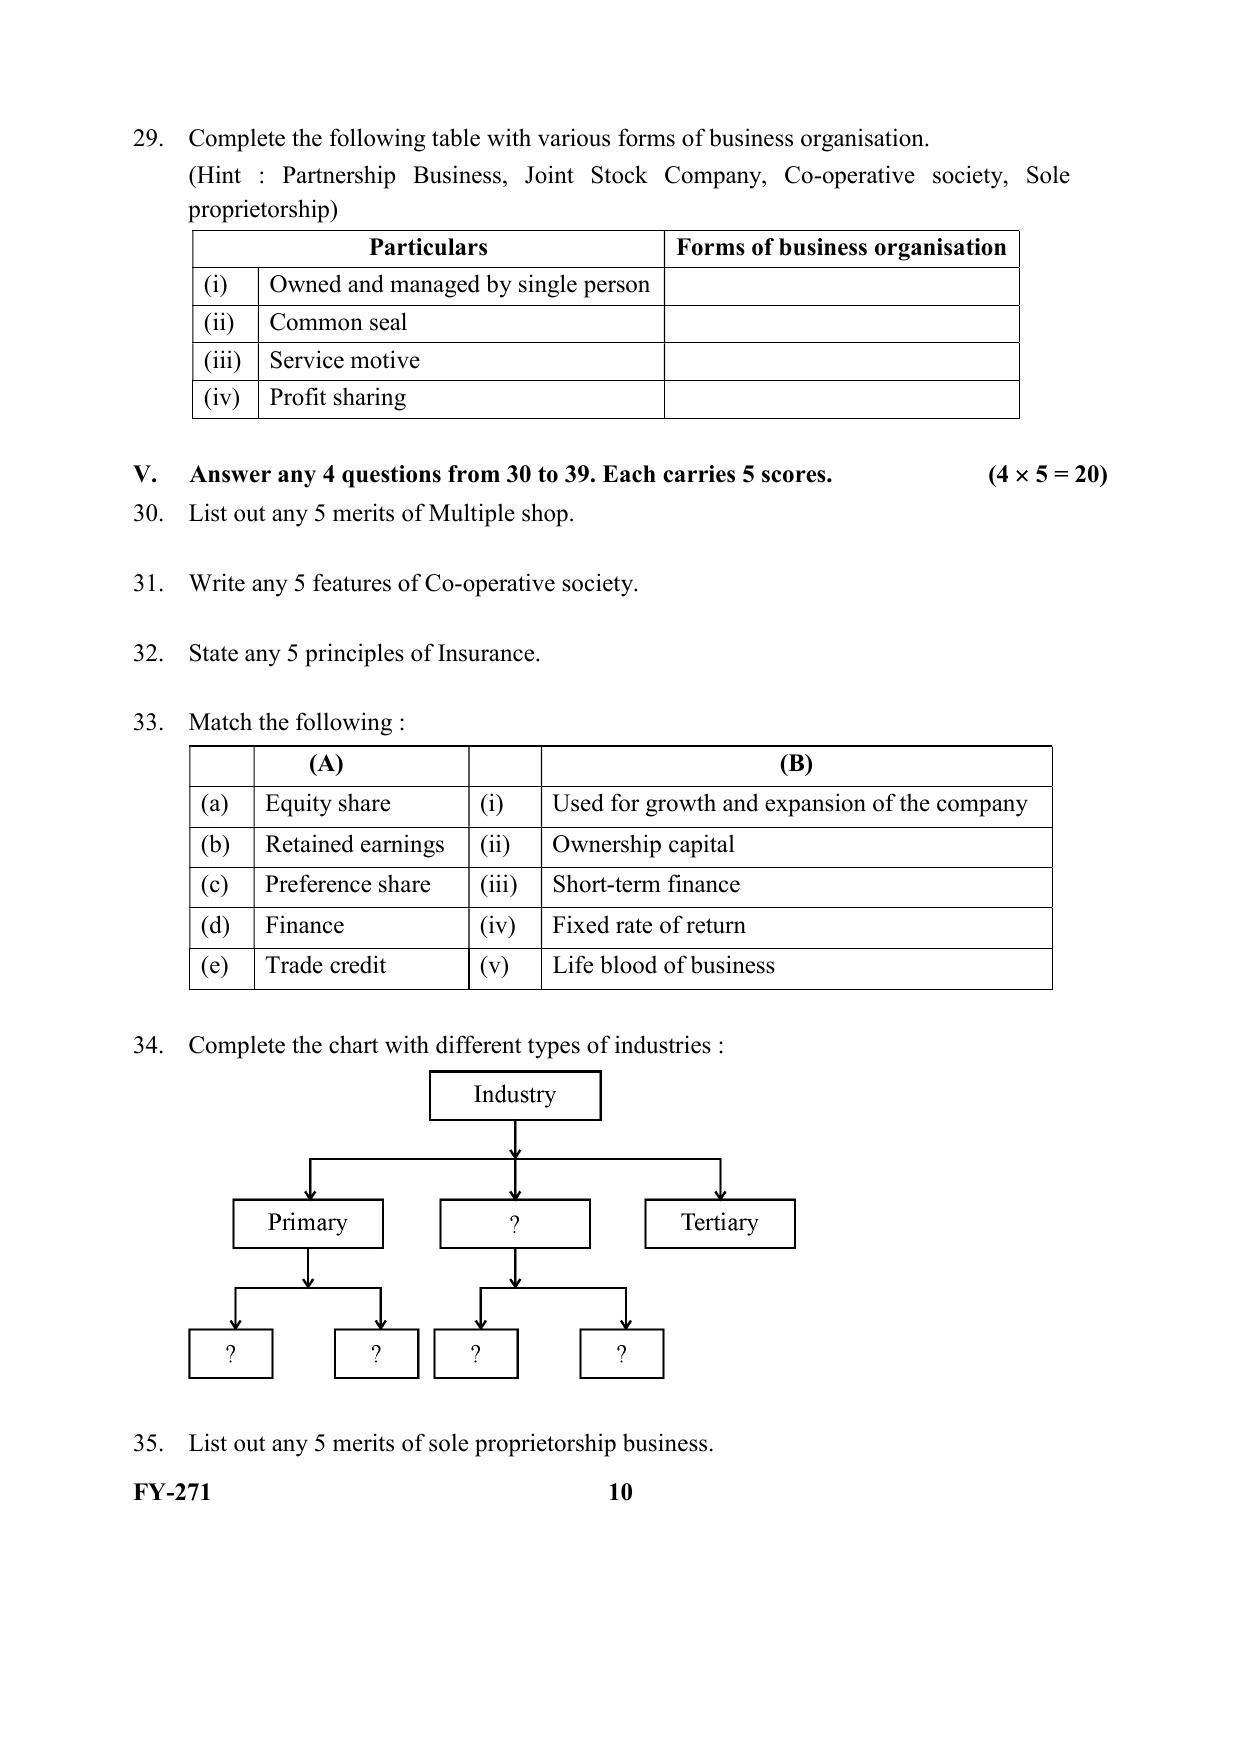 Kerala Plus One (Class 11th) Business Studies -Hearing Impaired Question Paper 2021 - Page 10